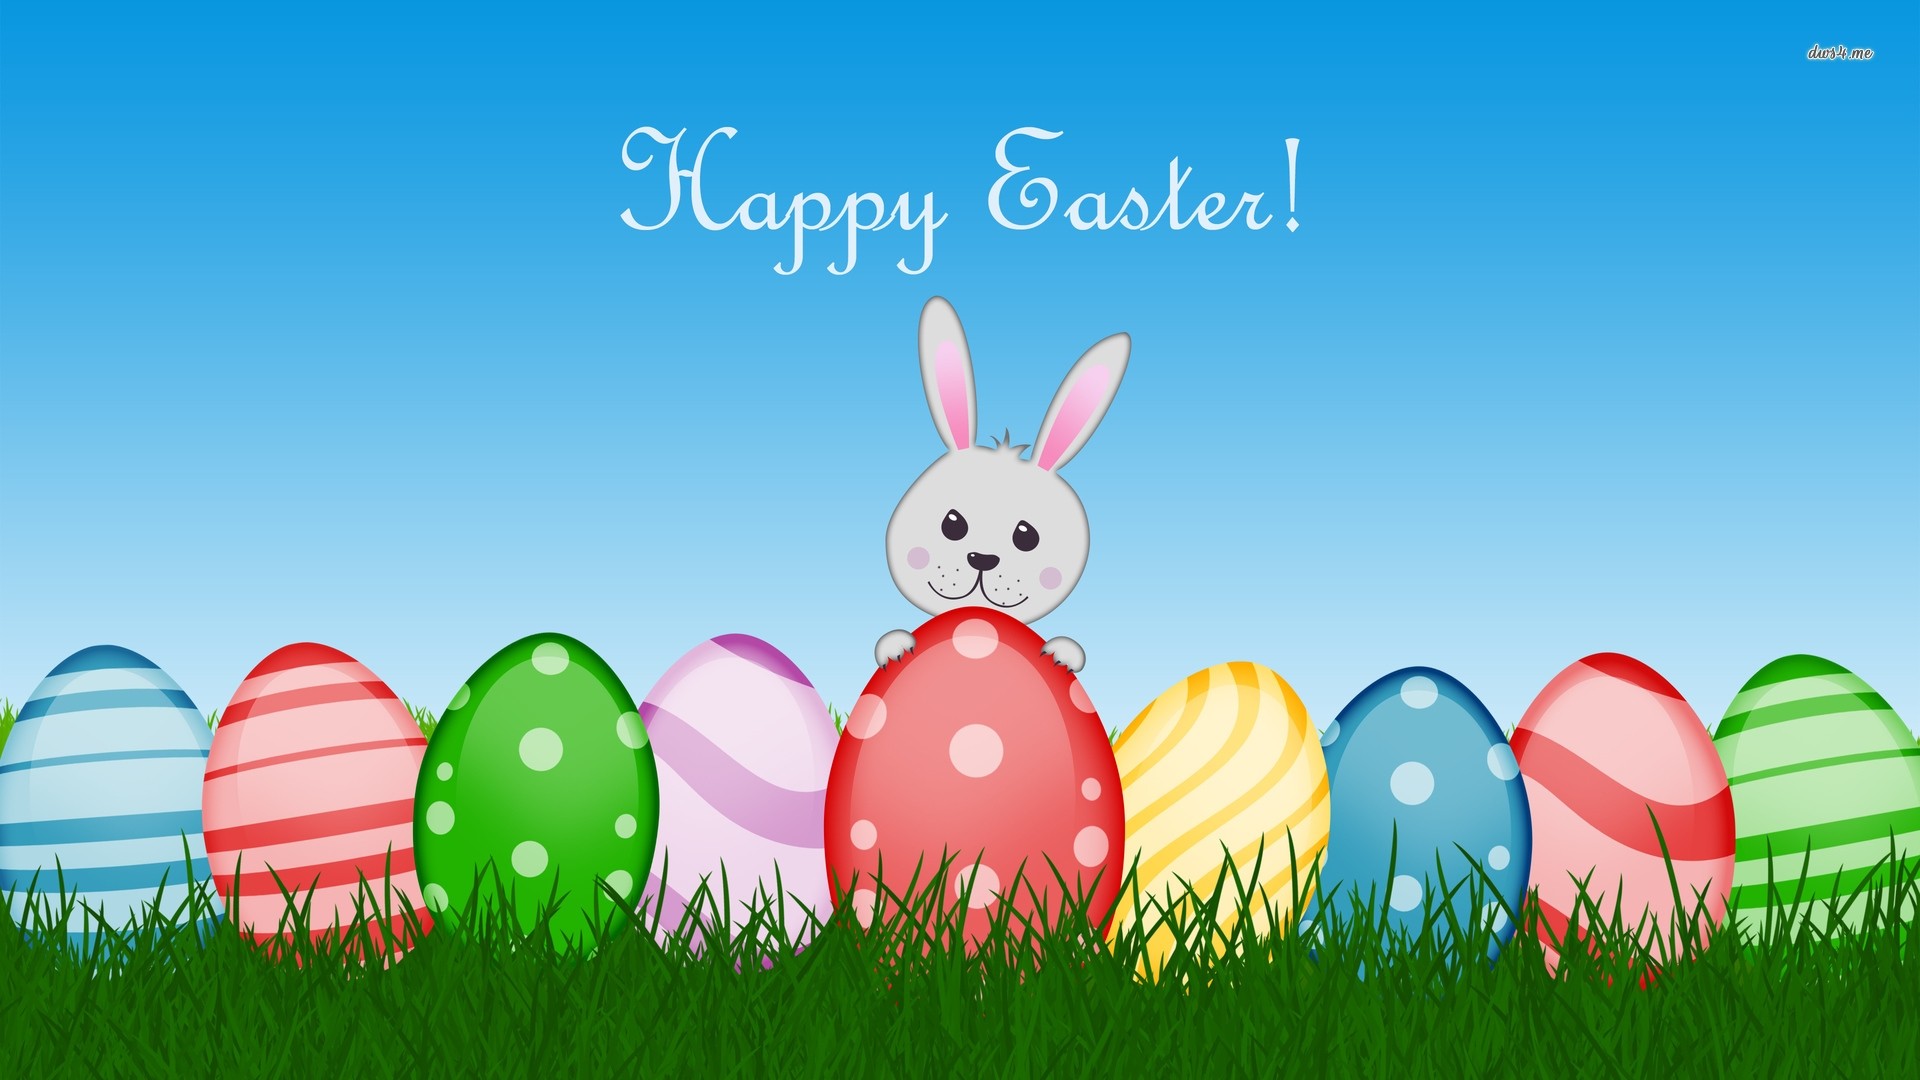 Happy Easter Image Free Download